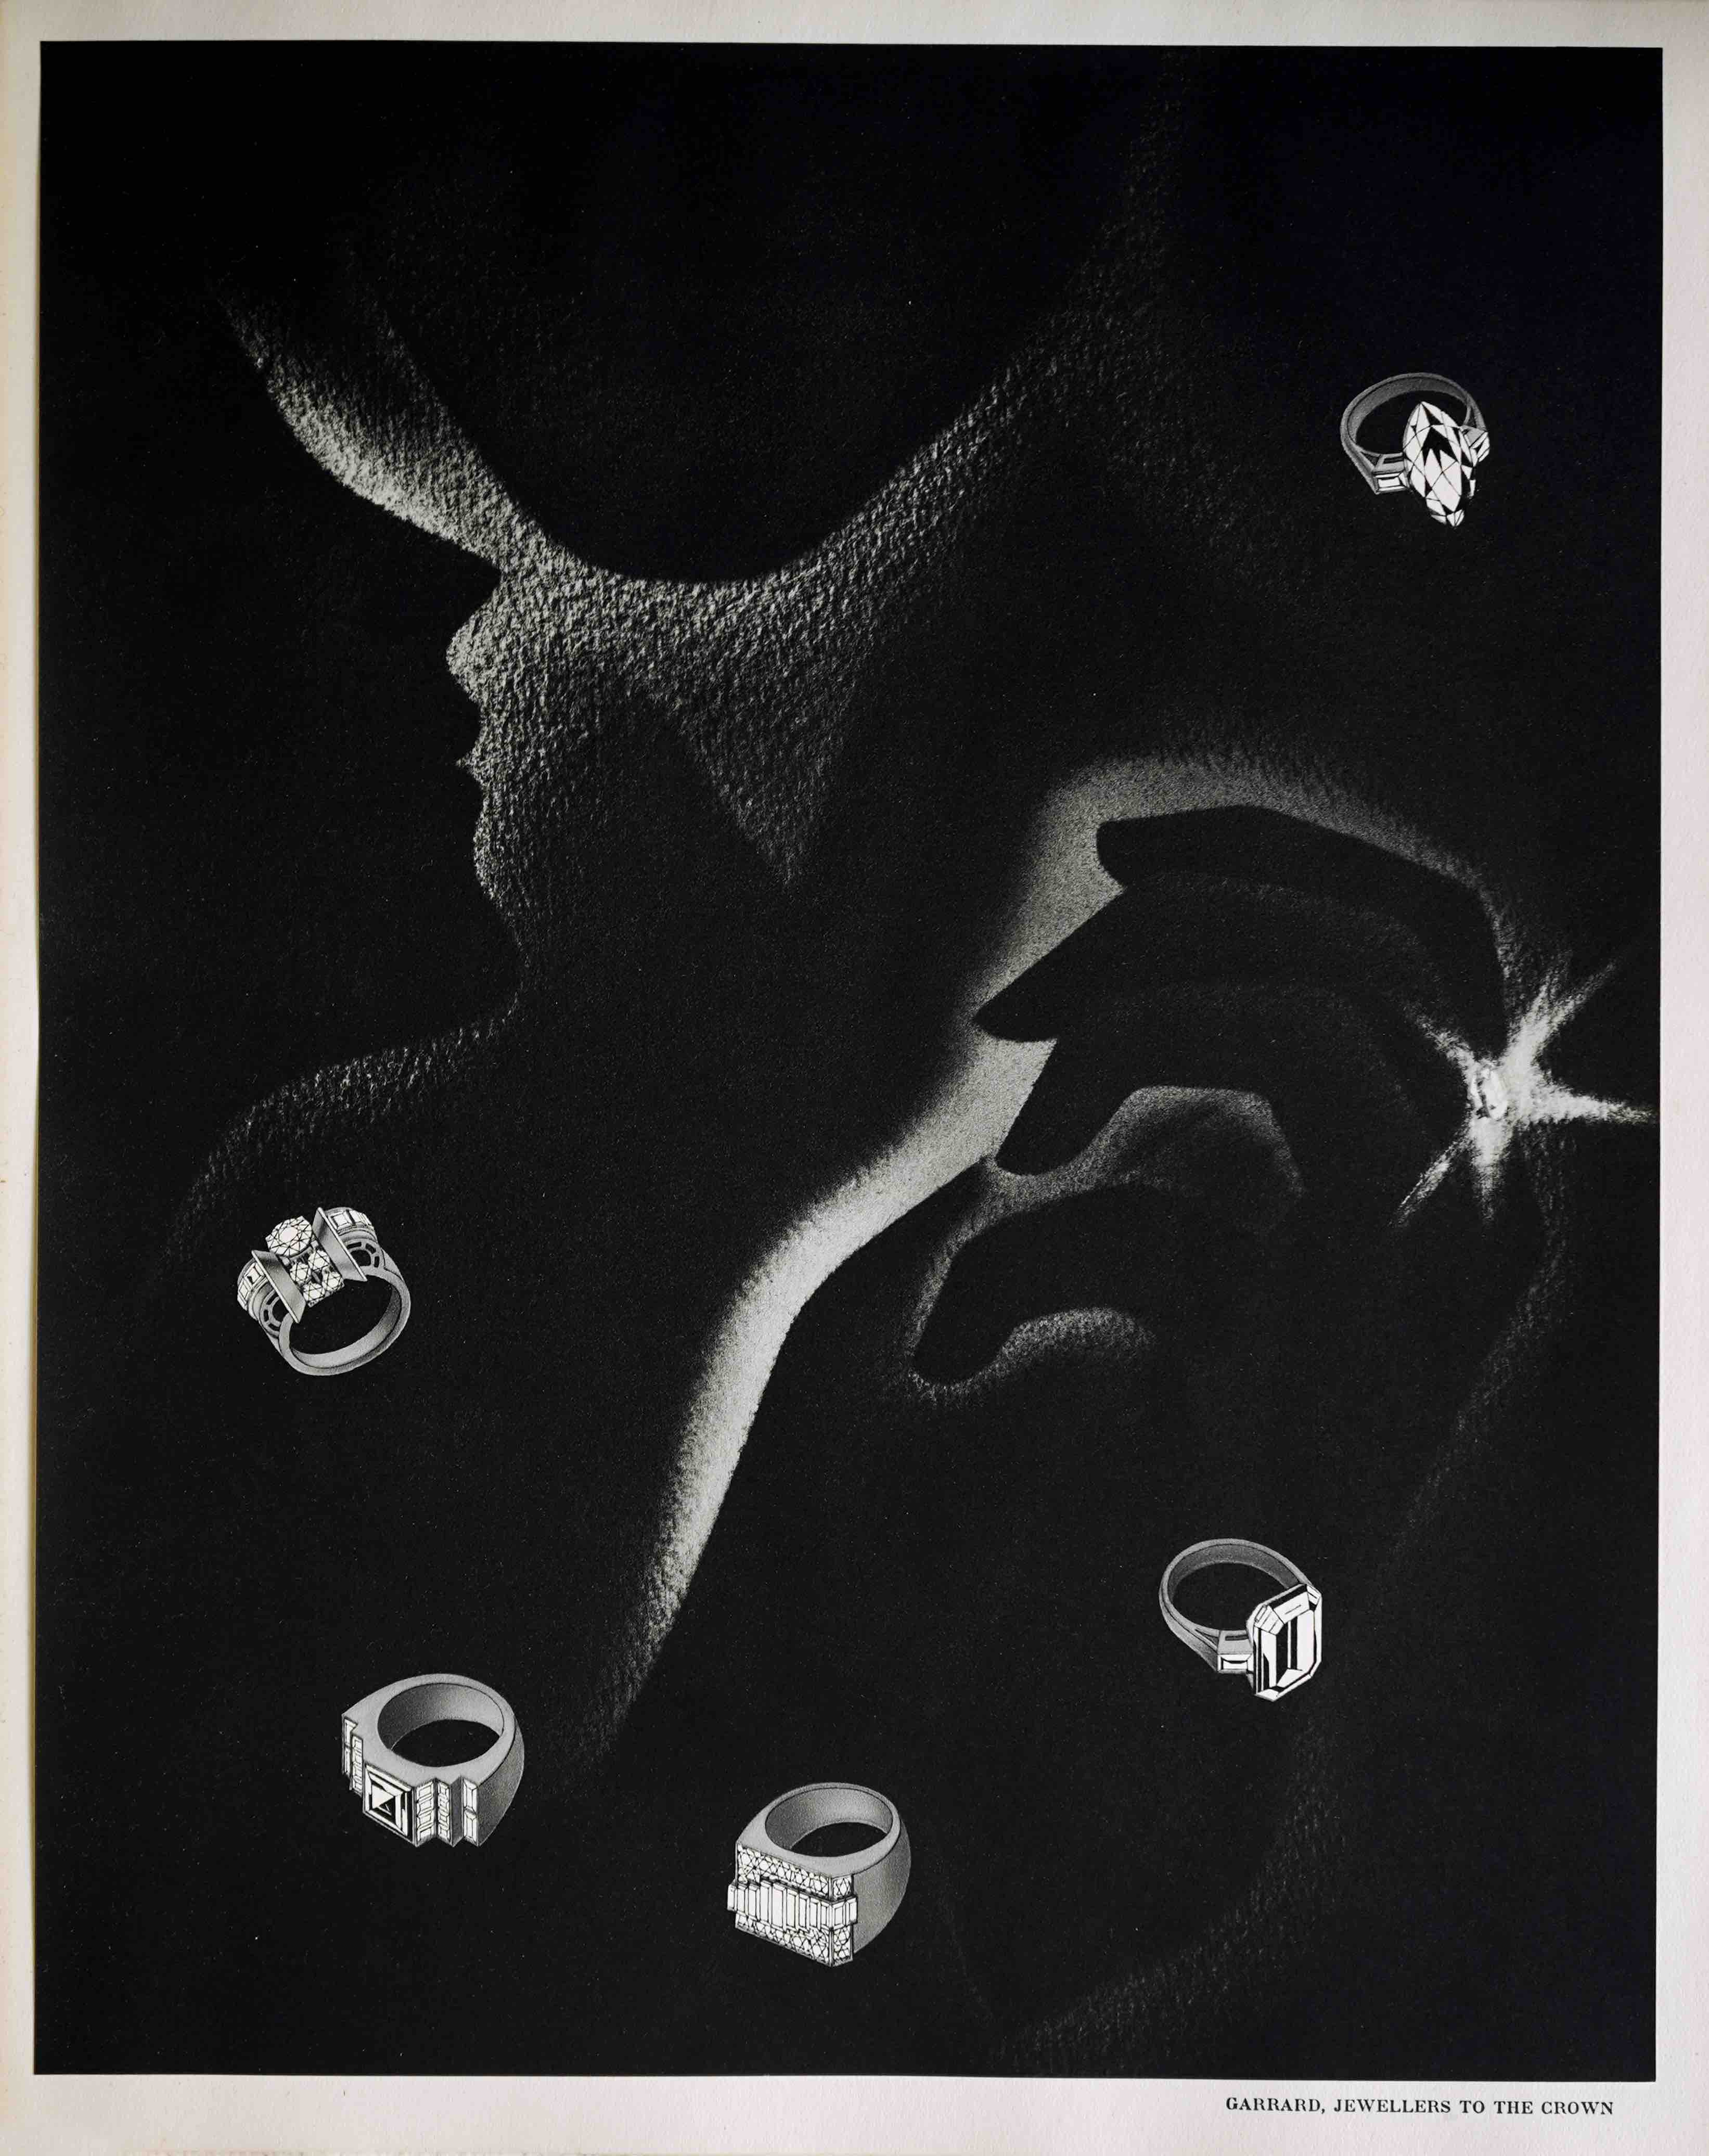 GARRARD [JEWELLERY TRADE CATALOGUE]: -  Rings. Garrard, Jewellers to the Crown (24, Ablemarle Street, London W1). Paris, Draeger, ca 1935.